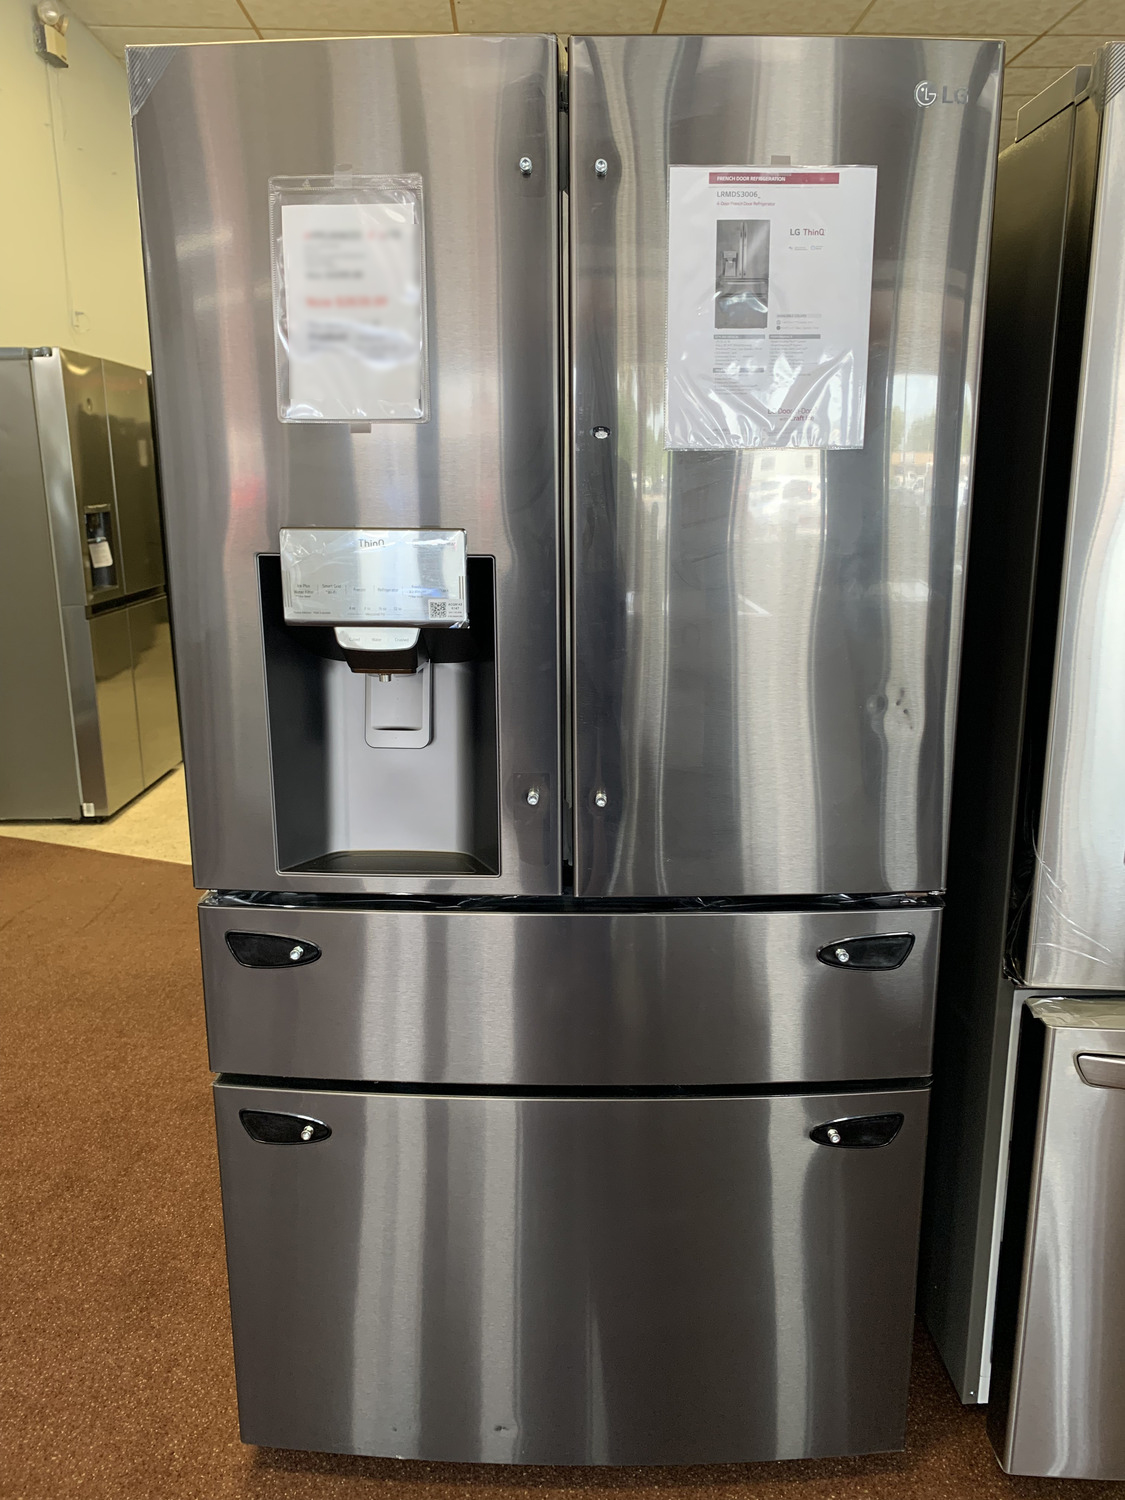 LG LRMDS3006D: Black Stainless Steel 30 Cu. ft. Smart Refrigerator with Craft Ice